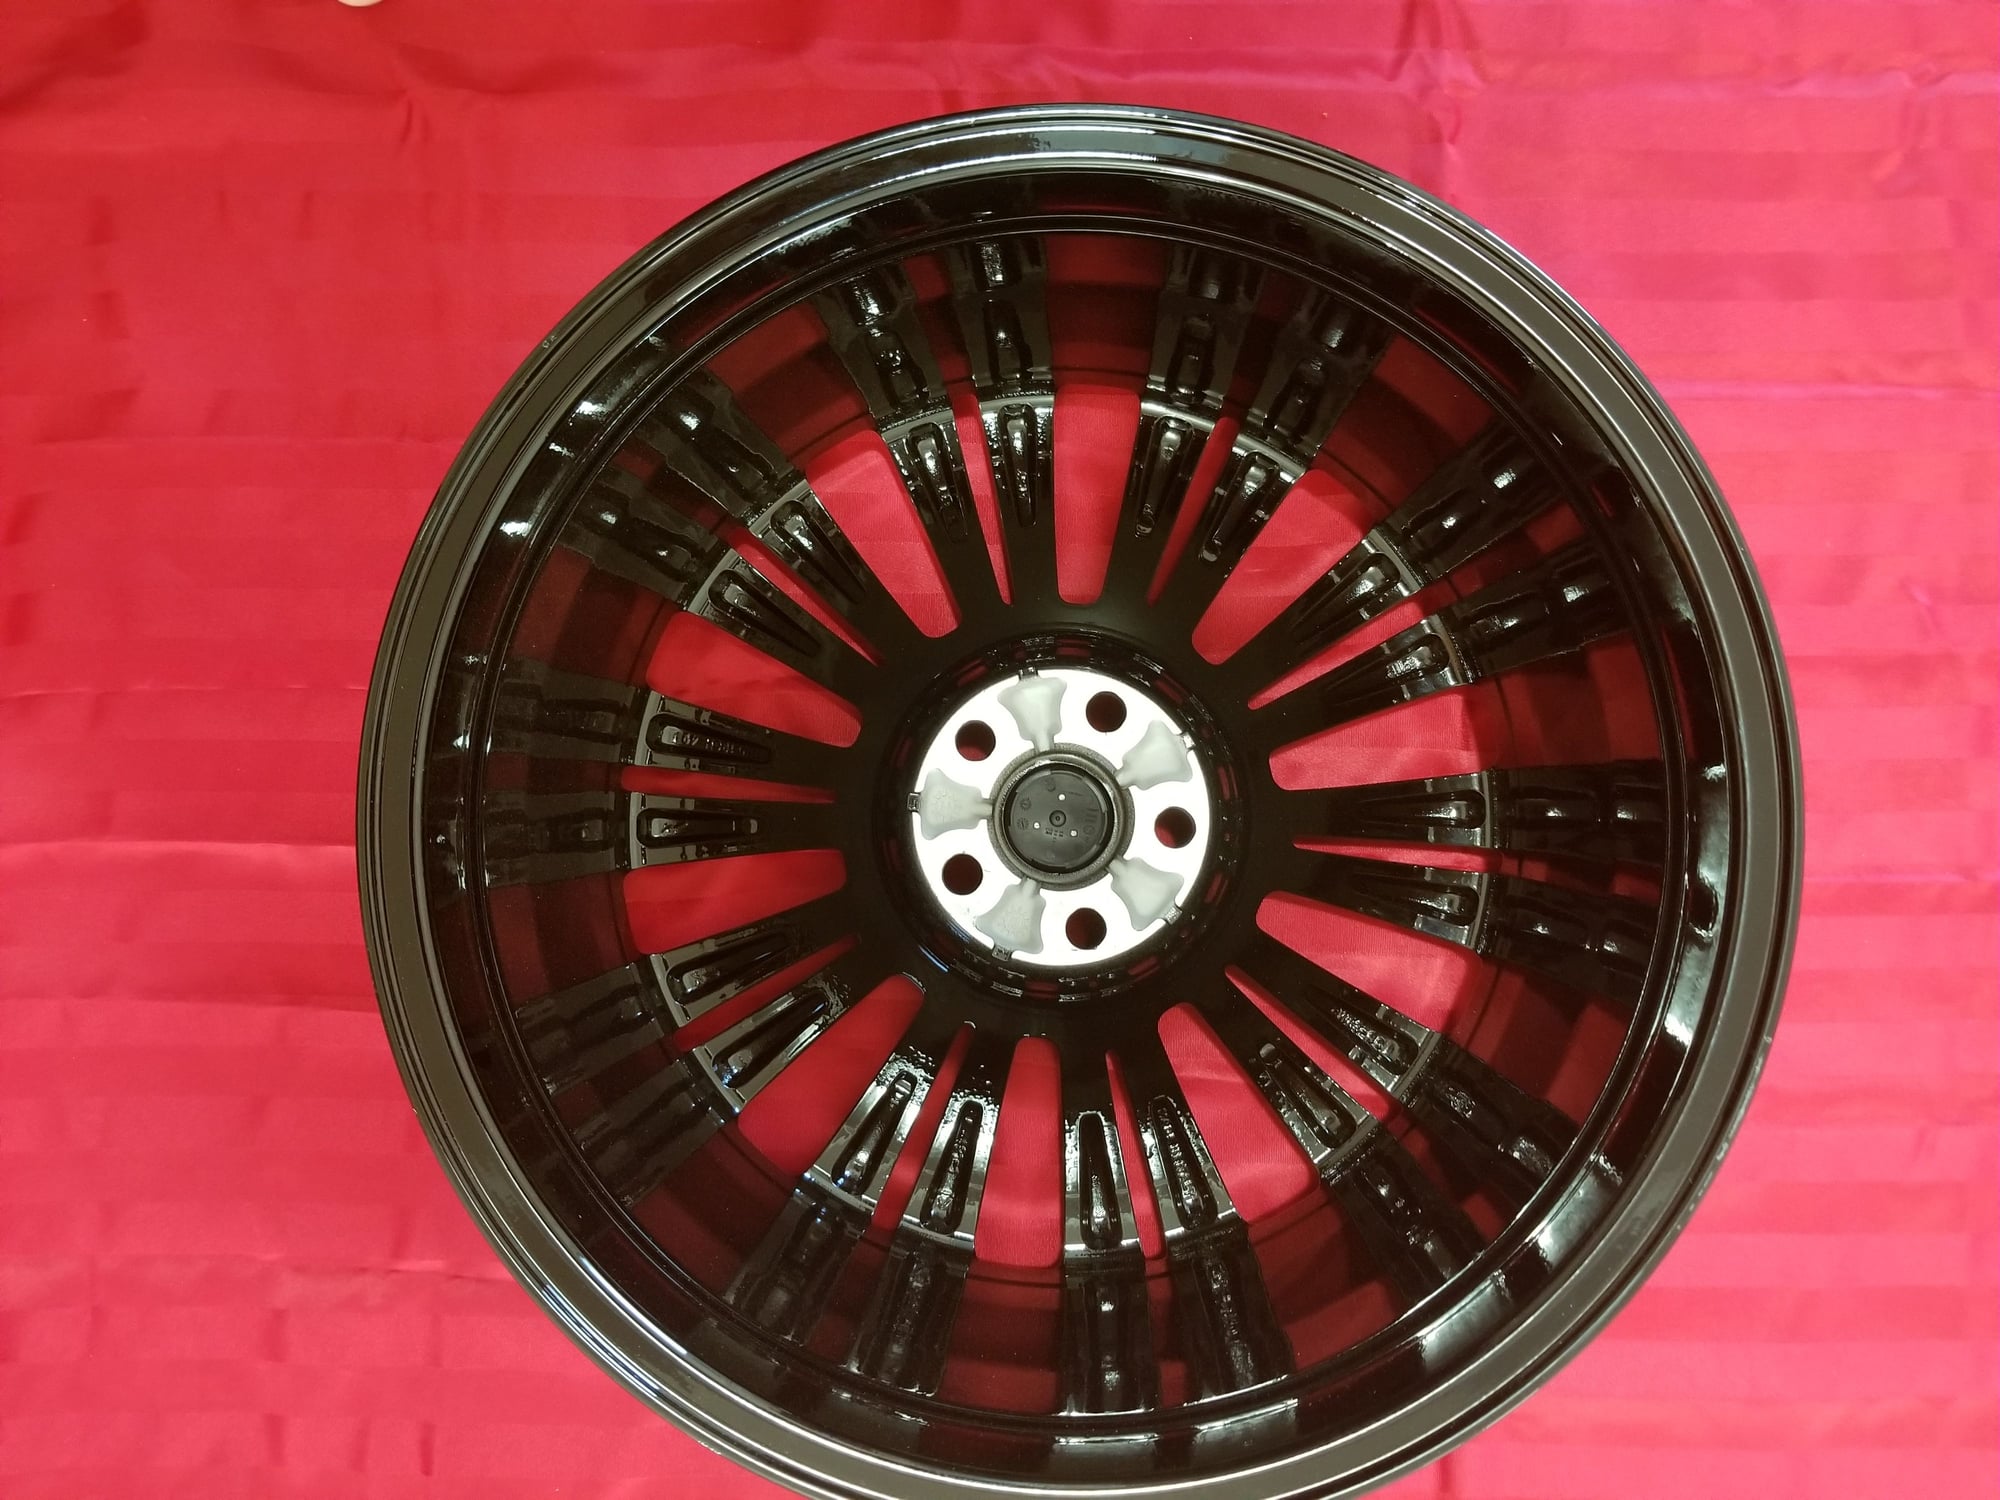 Wheels and Tires/Axles - Jaguar "Caravela" 19 Inch Rims - With TPMS Sensors - Canada Listing - New - Toronto, ON M4Y1R5, Canada